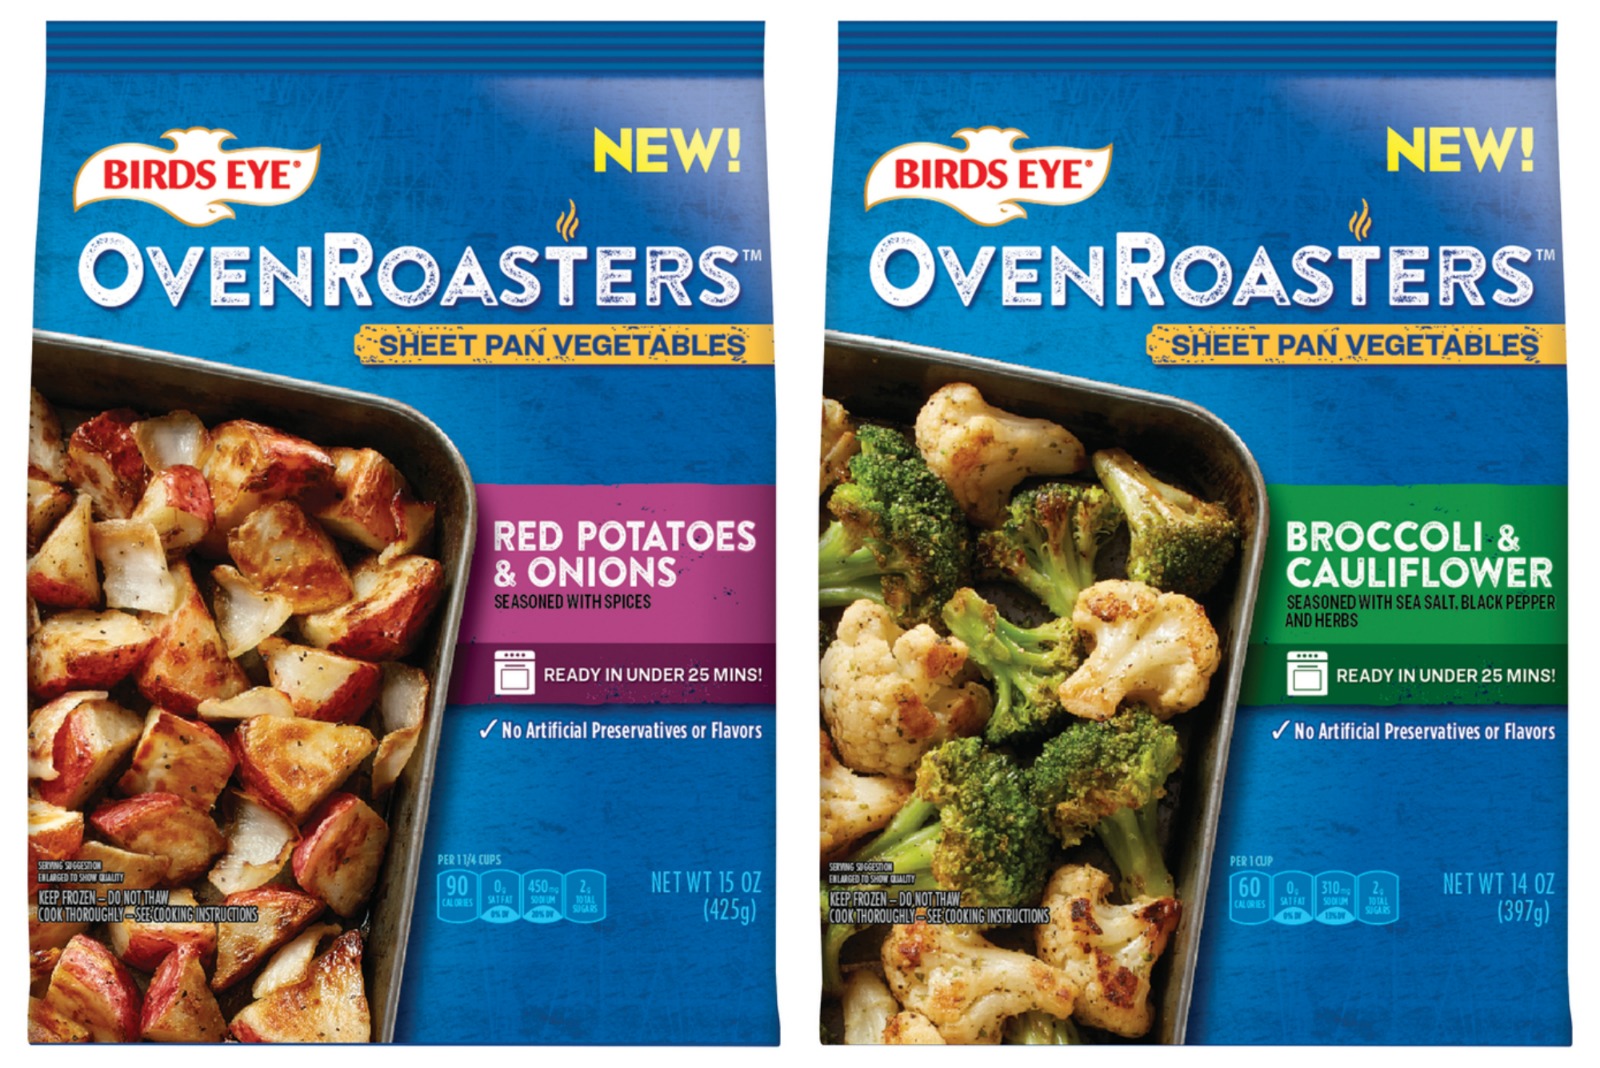 Try New Birds Eye Oven Roasters and Mac & Cheese & Save At Publix on I Heart Publix